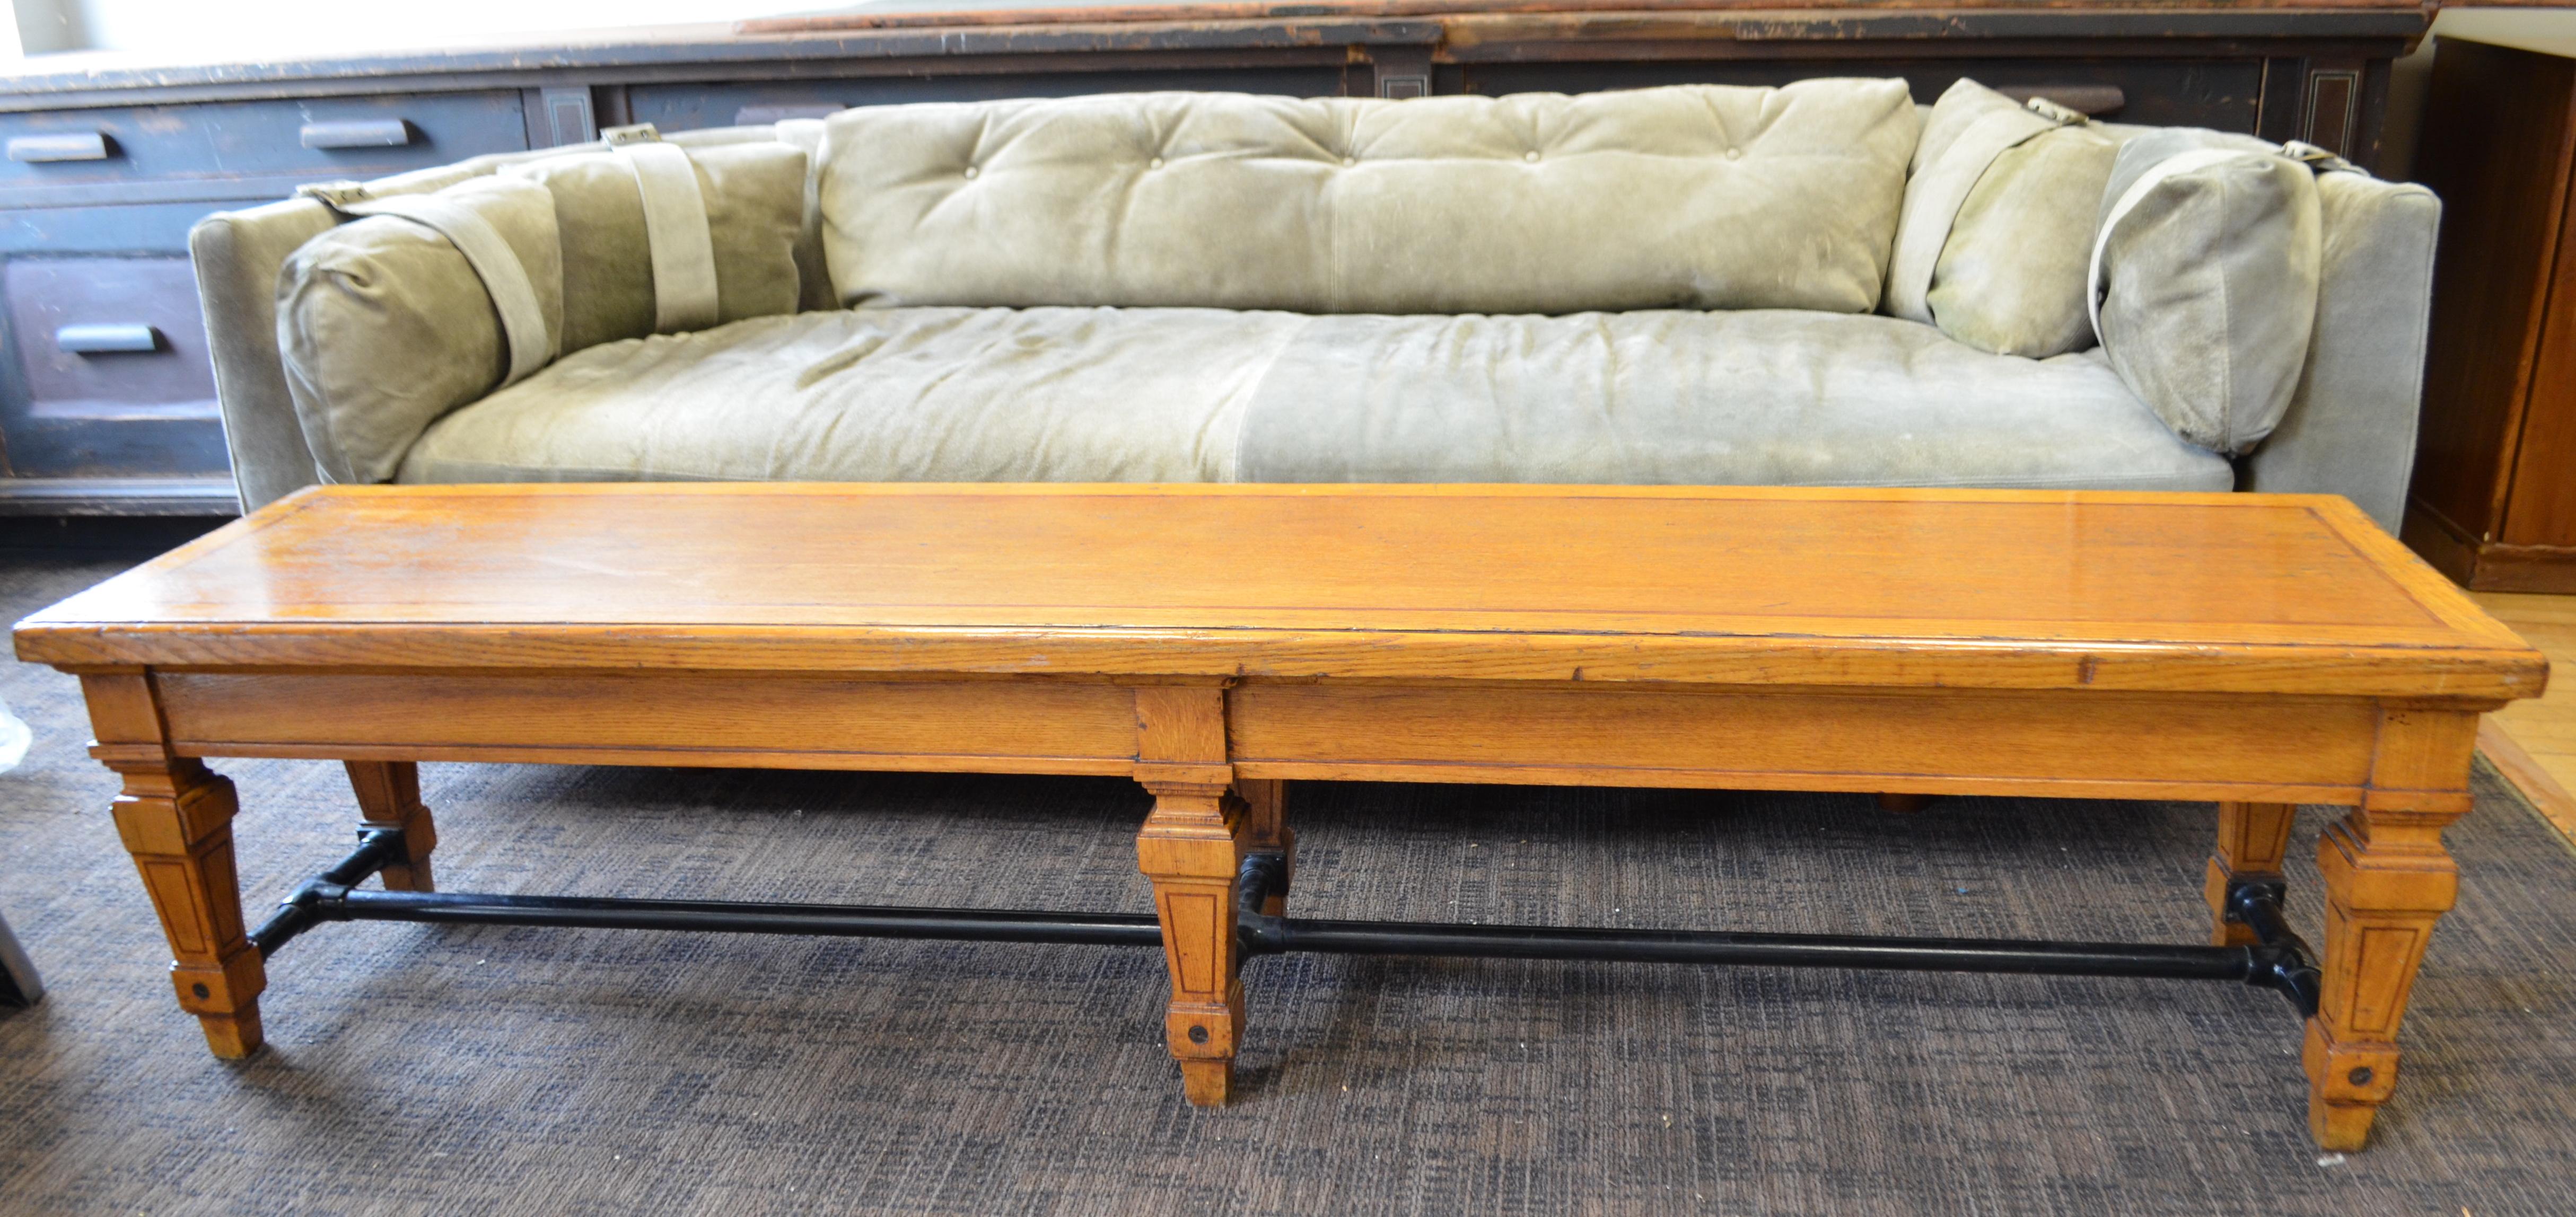 Bench from a Parisian bank, circa 1900, of hand carved oak legs and top with black steel bar supports. Strong, sturdy and secure as the bank it came from. The 78 inch width is impressive and would accommodate a long hallway or an expansive lobby